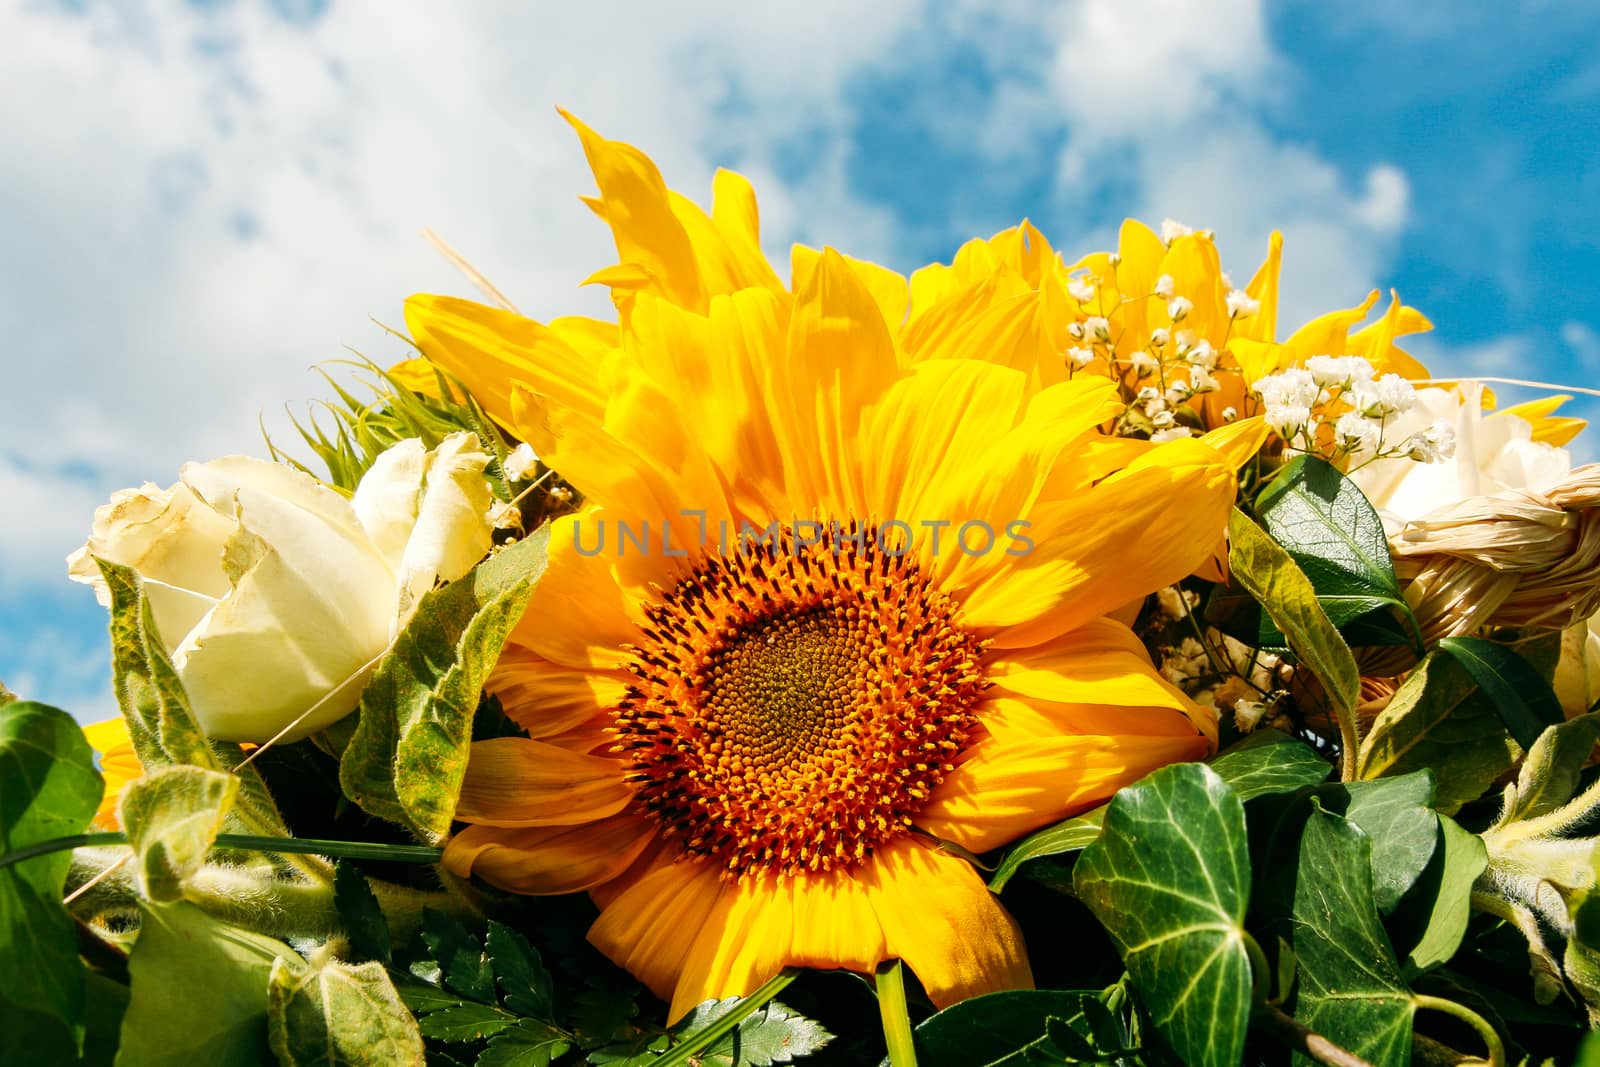 Bouquet of sunflowers outdoor by a_mikos